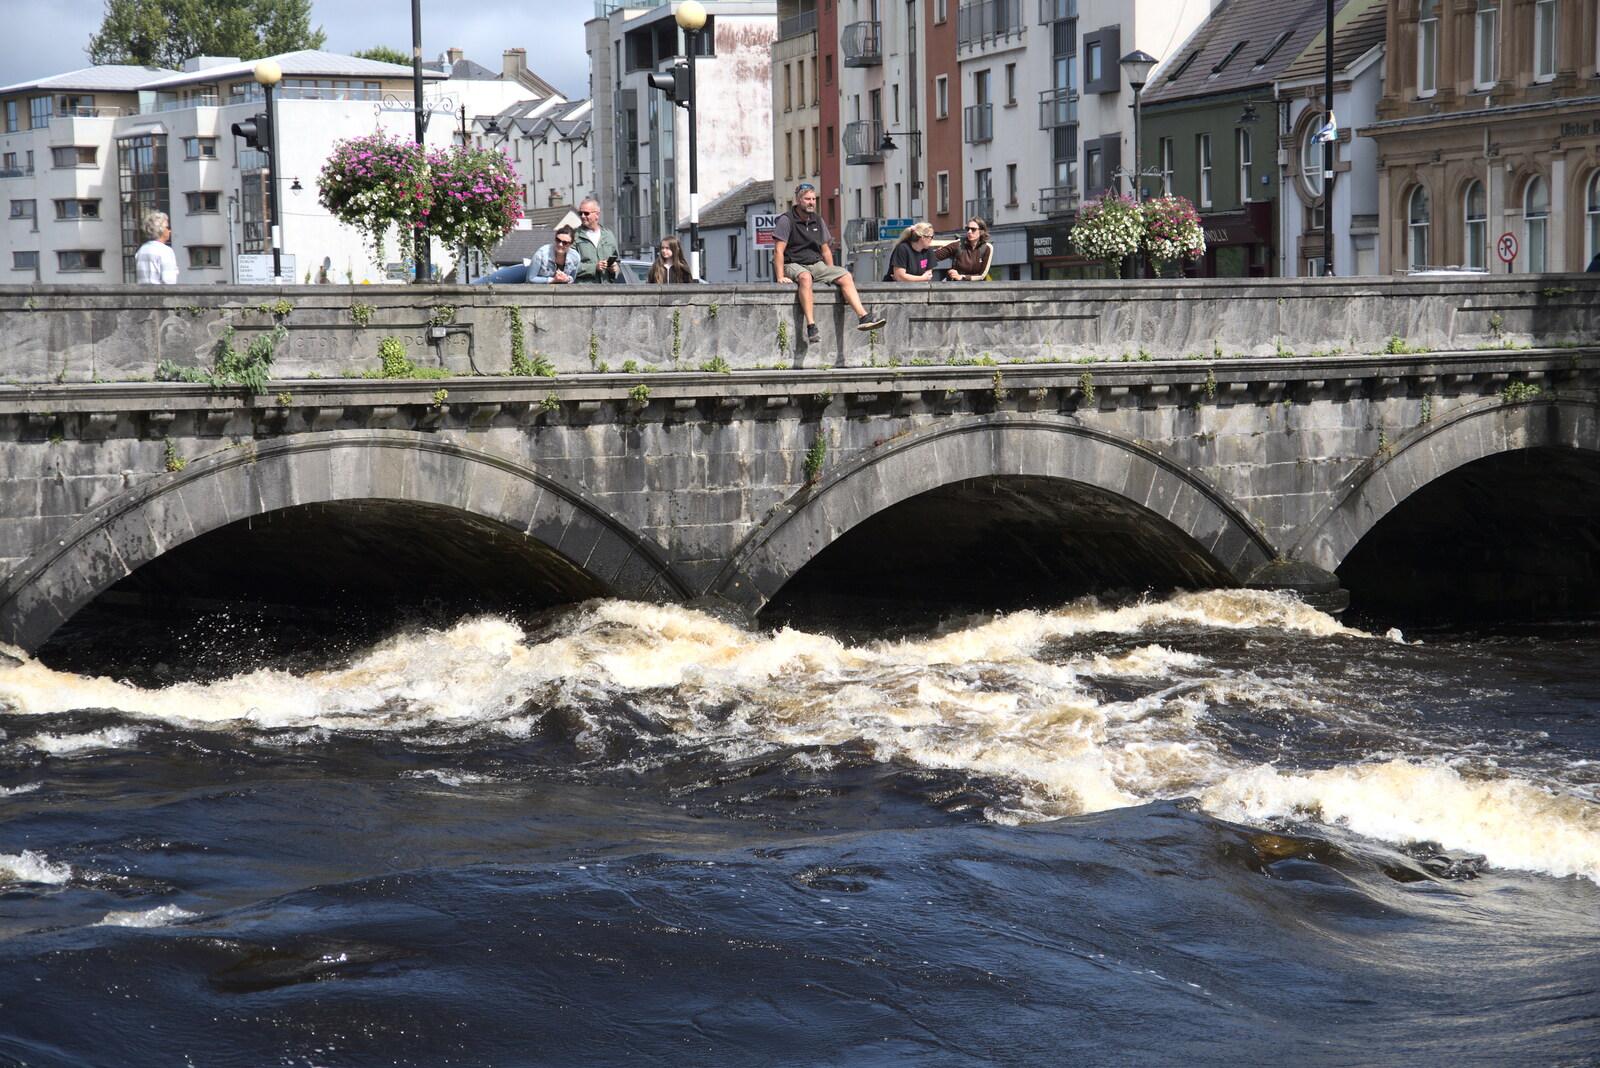 A Trip to Manorhamilton, County Leitrim, Ireland - 11th August 2021: Some dude looks like he's going to jump in